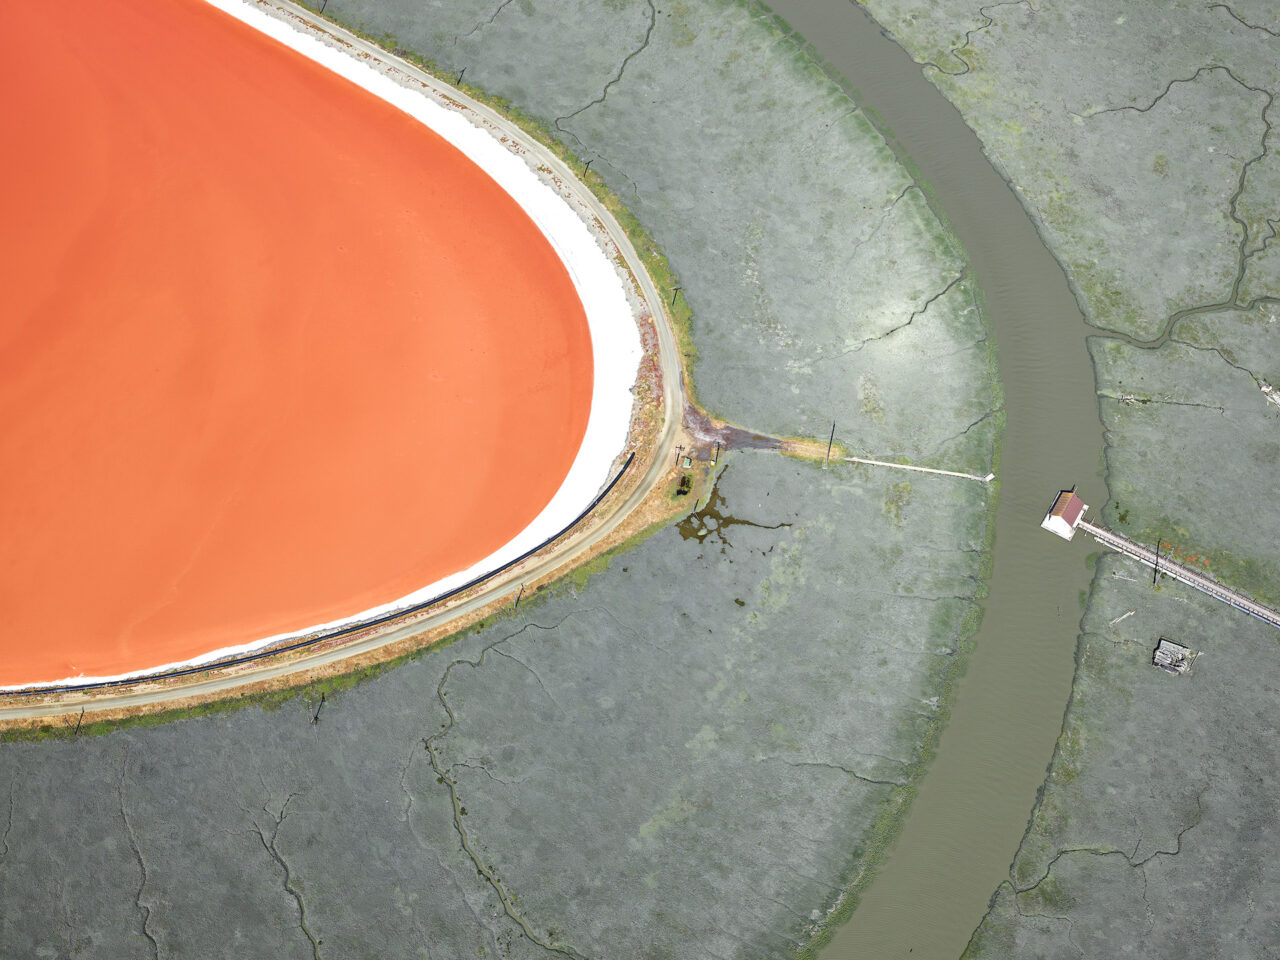 Aerial view of an orange lake, with a small house near it